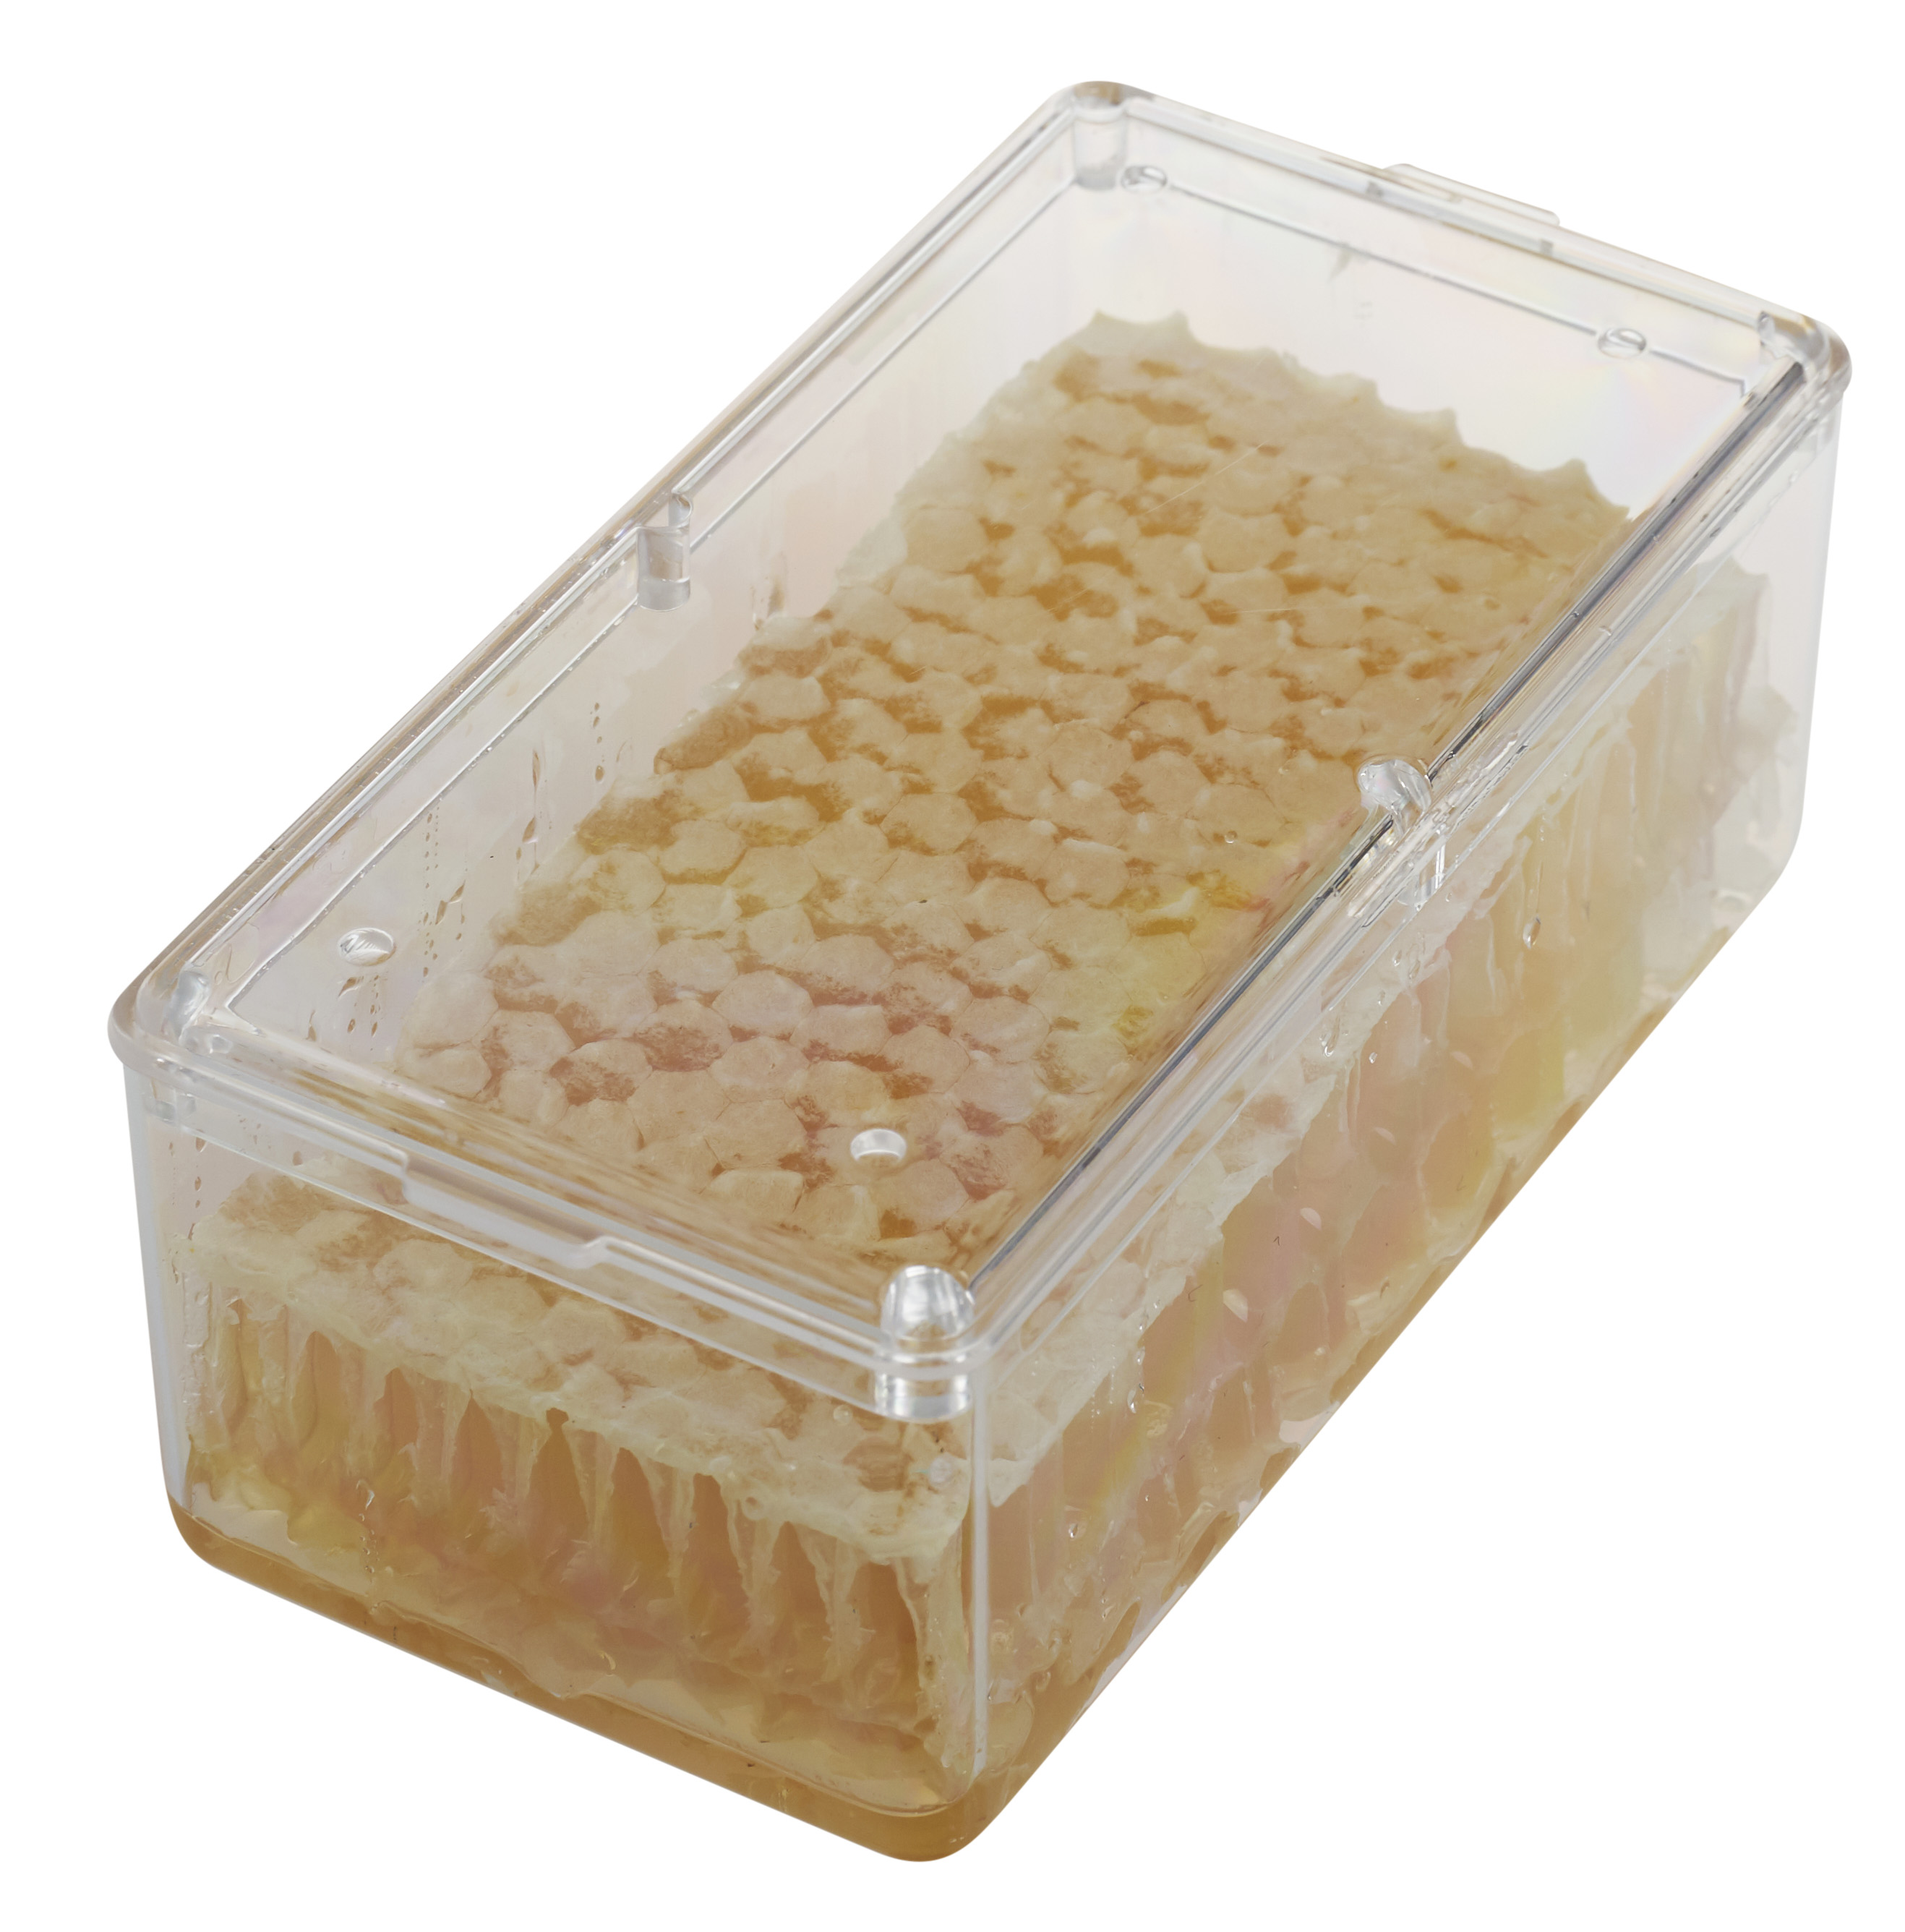 Cut Comb Honey Containers: Perfect For Comb Honey & Displaying Honeycombs